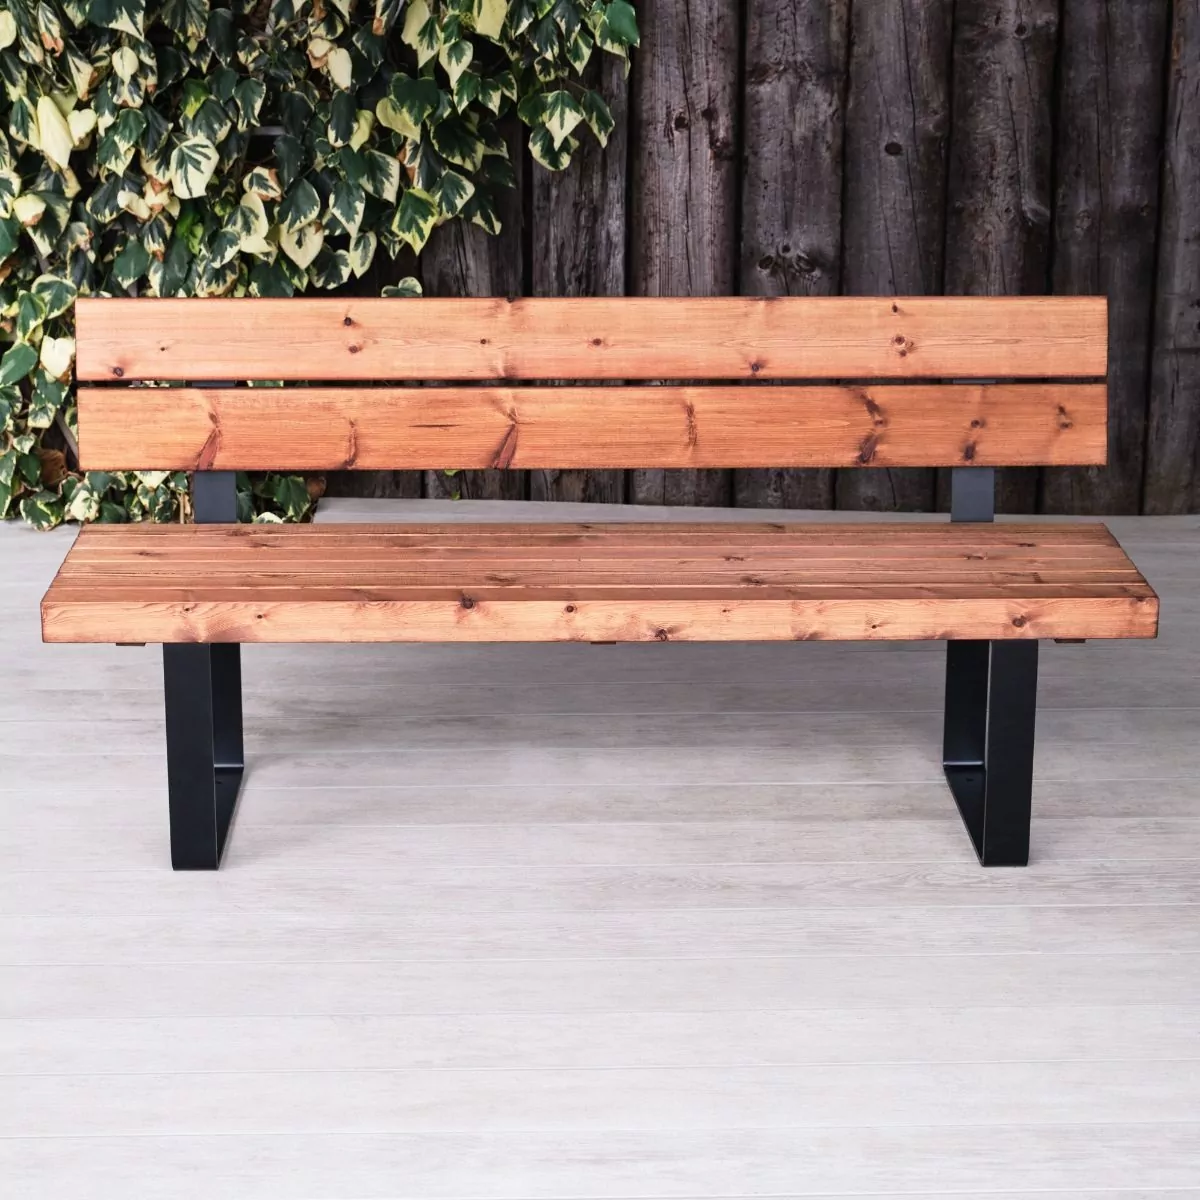 wood-and-metal-industrial-outdoor-commercial-bench-with-back-4